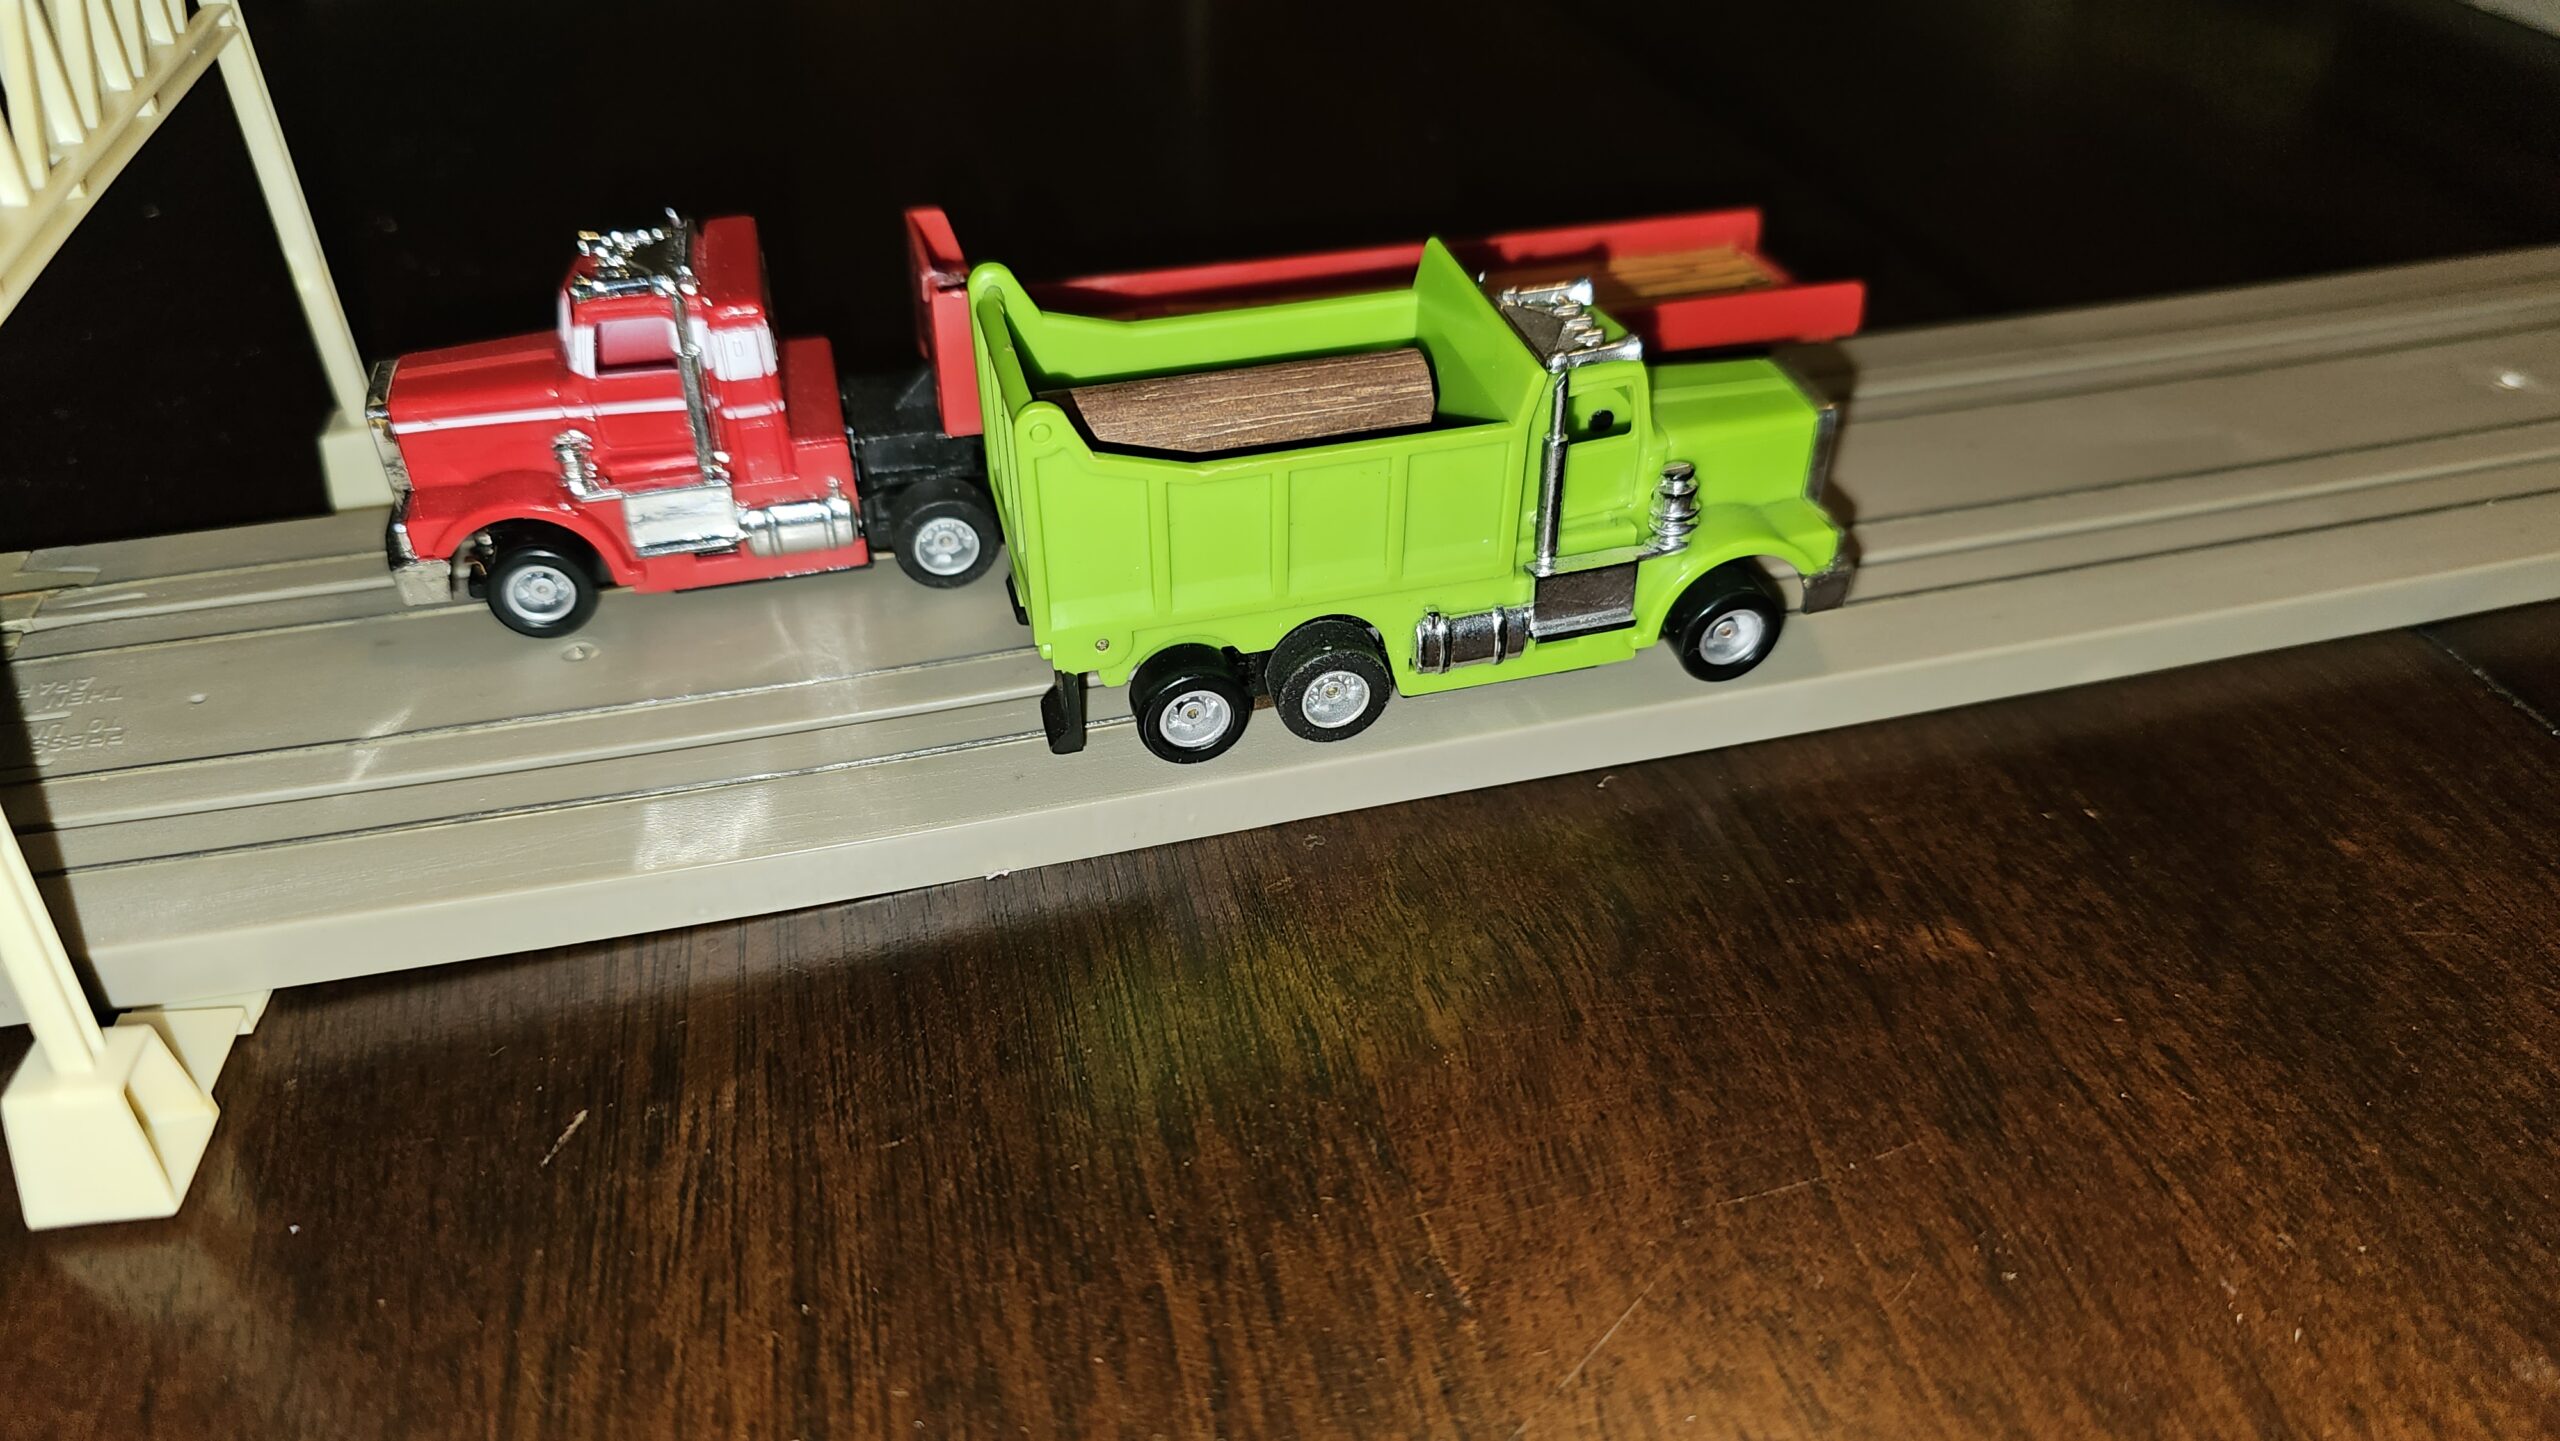 Tyco US1 Trucking Lime Green Dump Truck